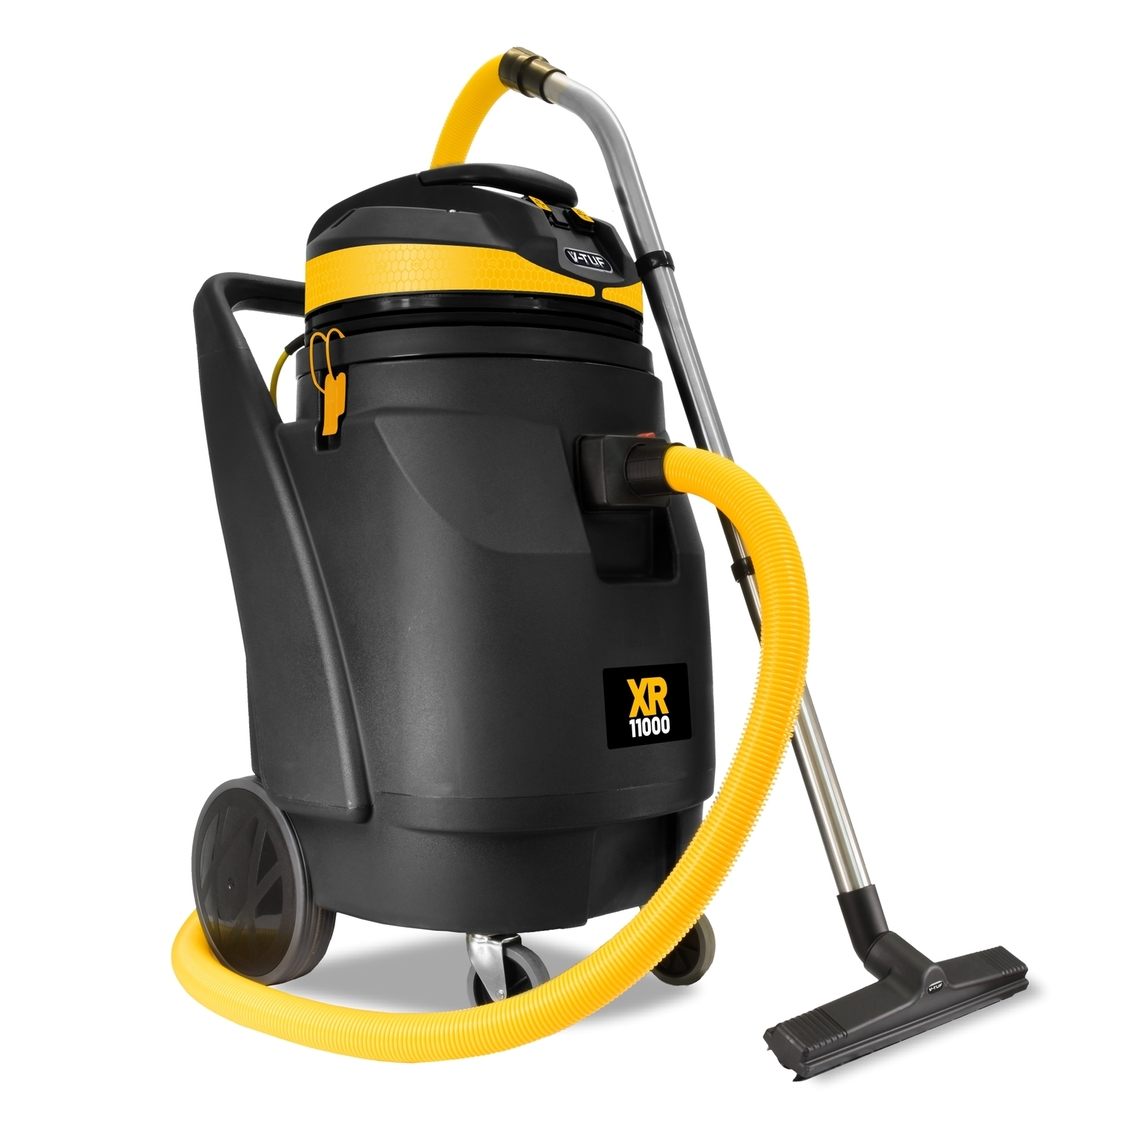 V-TUF XR11000 110V 110L 2400W High Performance Wet & Dry Industrial Vacuum Cleaner - Made from 70% Recycled Plastic  